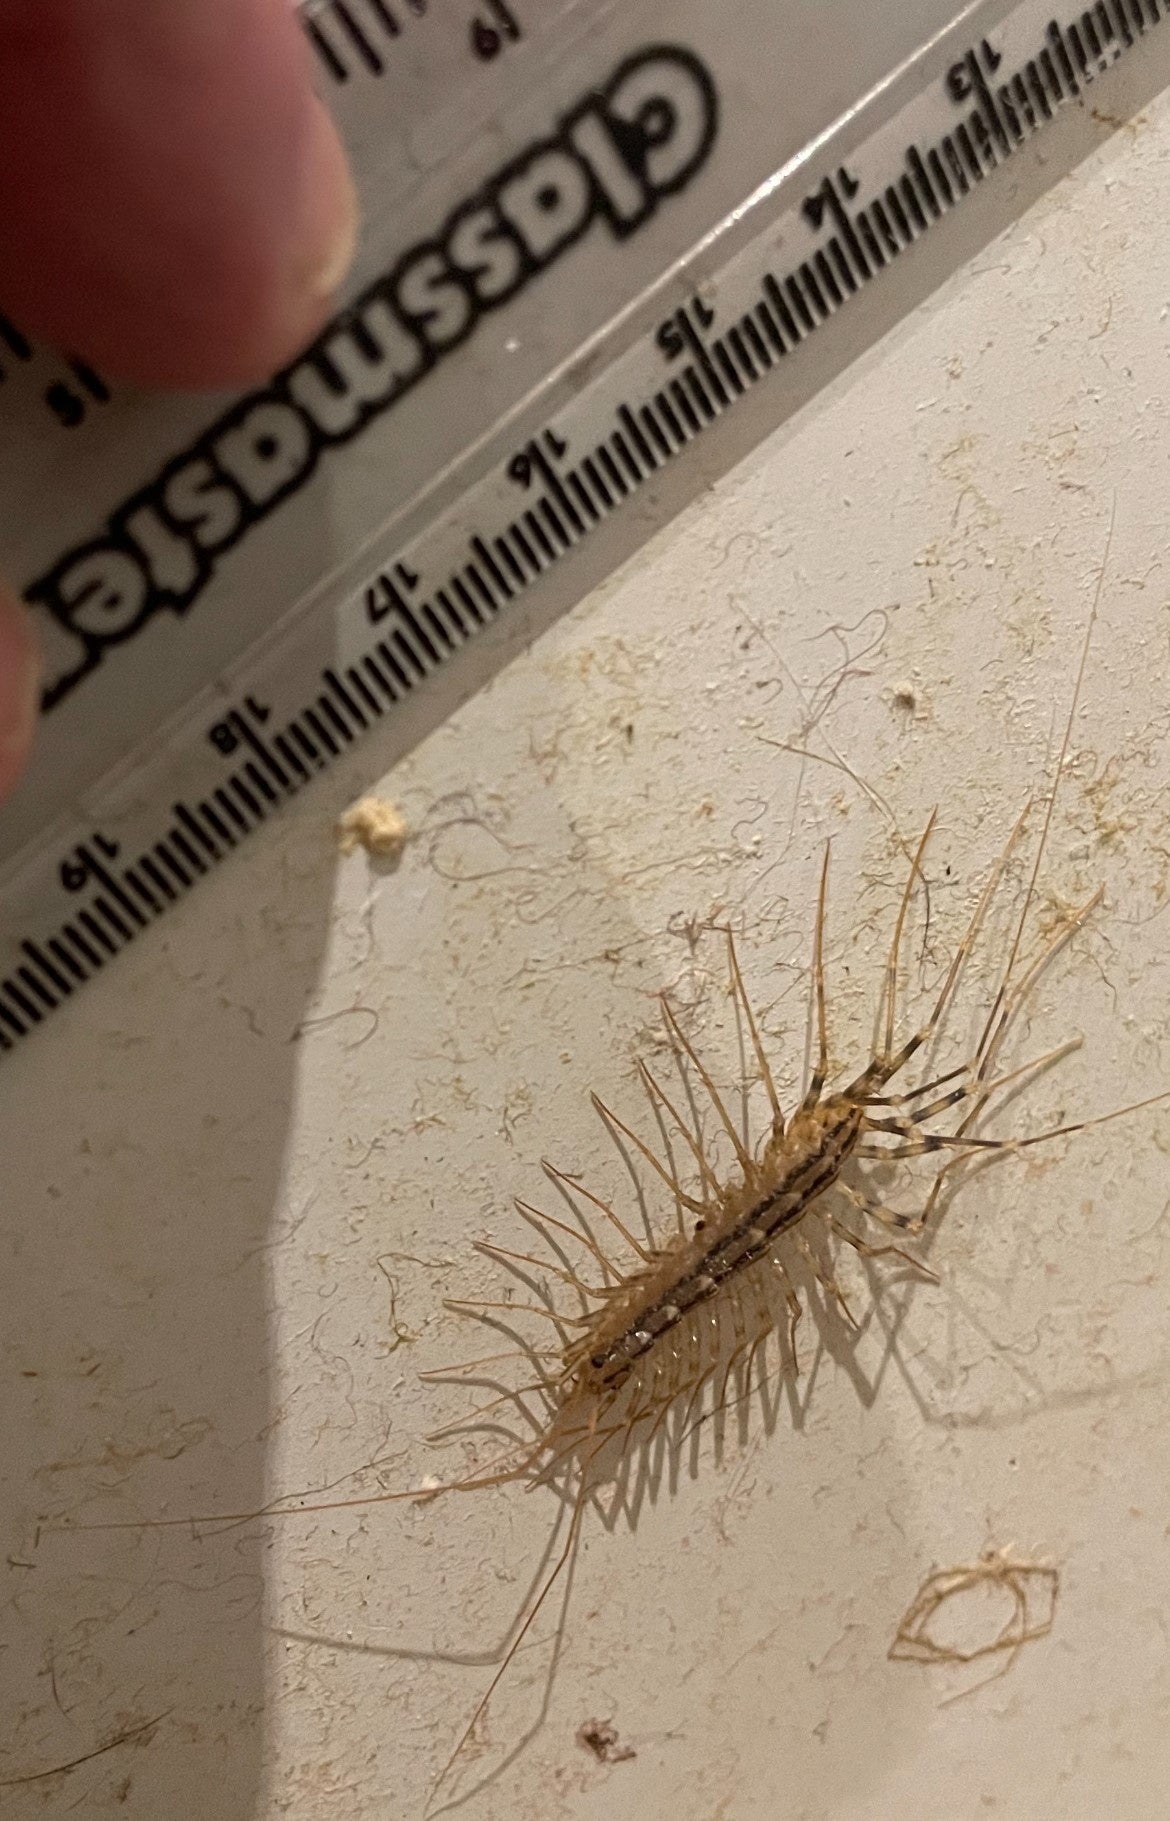 Critter confirmed as a scutigera coleoptrata - a species rarely seen in the UK